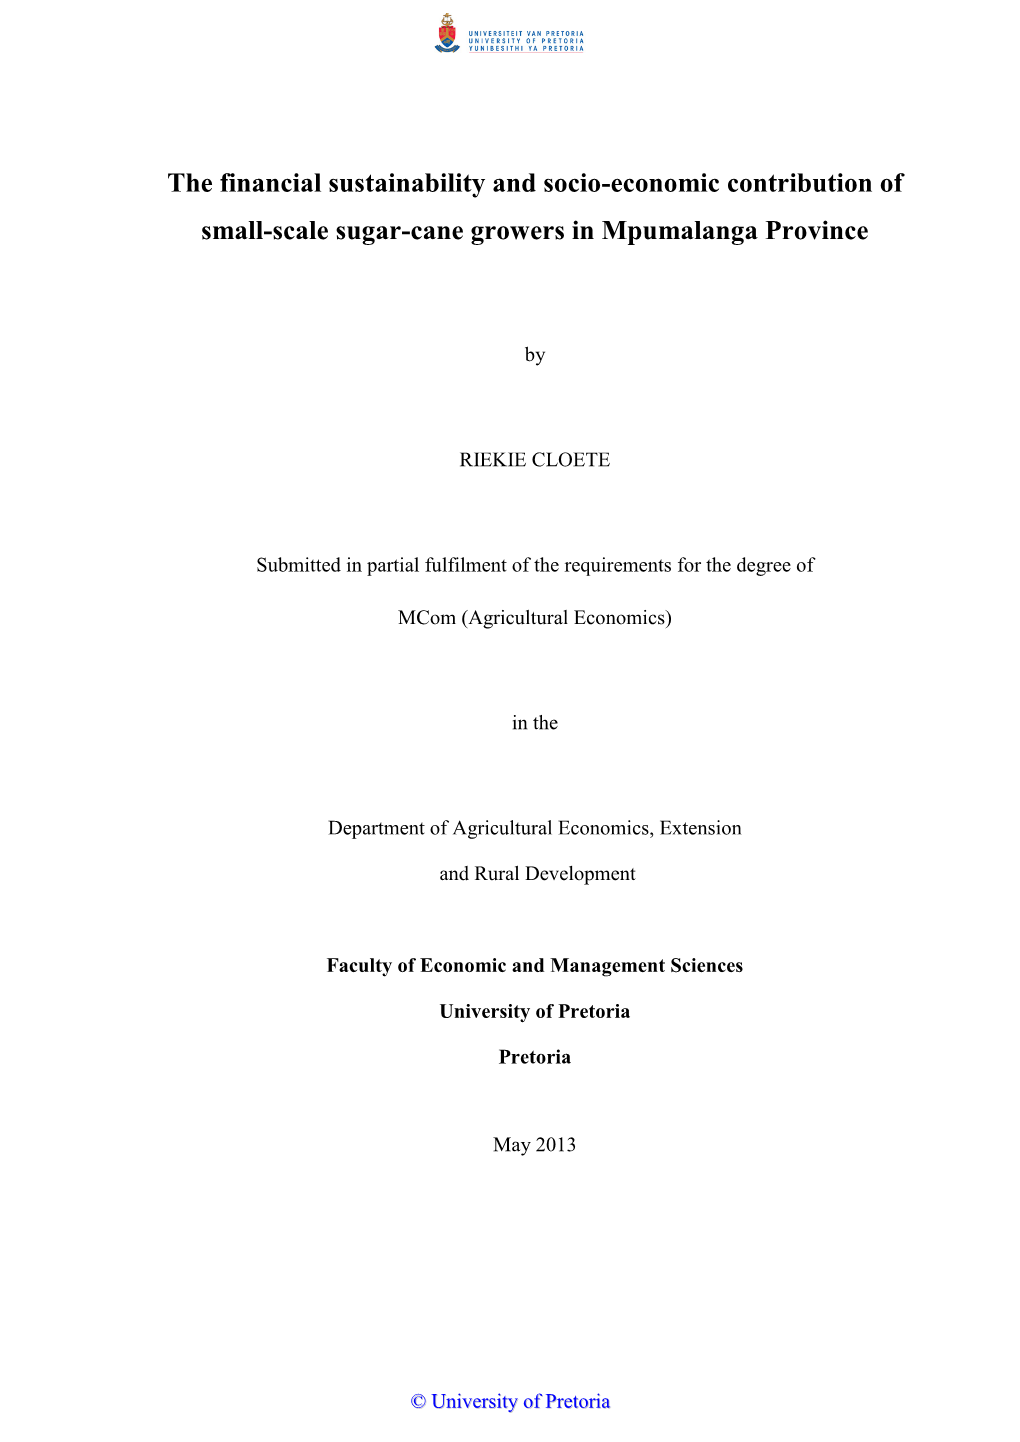 The Financial Sustainability and Socio-Economic Contribution of Small-Scale Sugar-Cane Growers in Mpumalanga Province